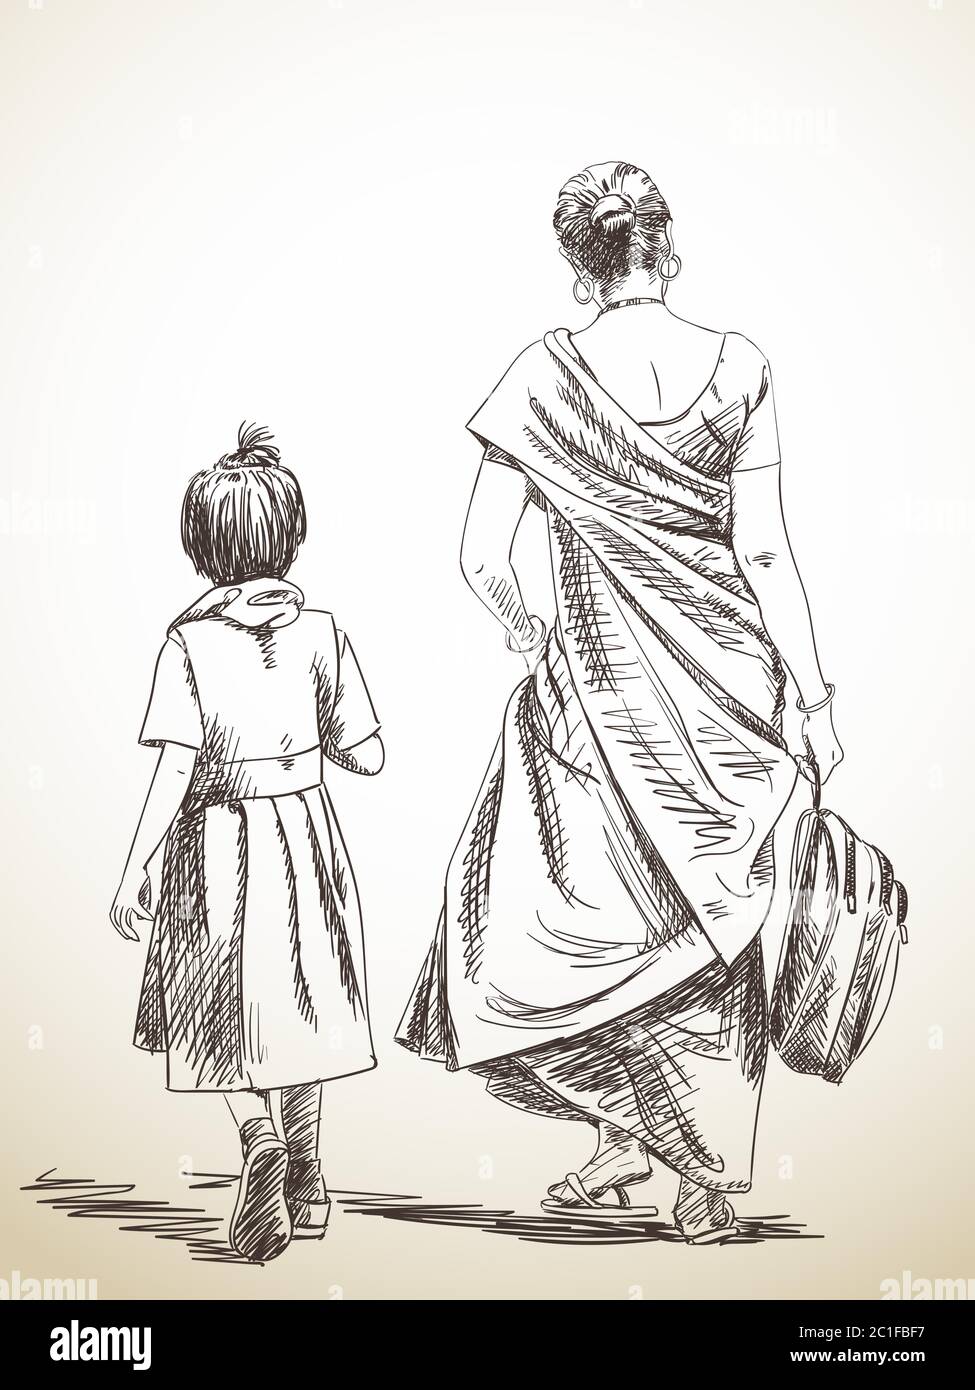 Buy A Realistic Pencil Sketch of Mother-daughter Love Canvas Prints Mother  and Daughter in Nature's Embrace PNG, JPG & MP4 Collection Online in India  - Etsy